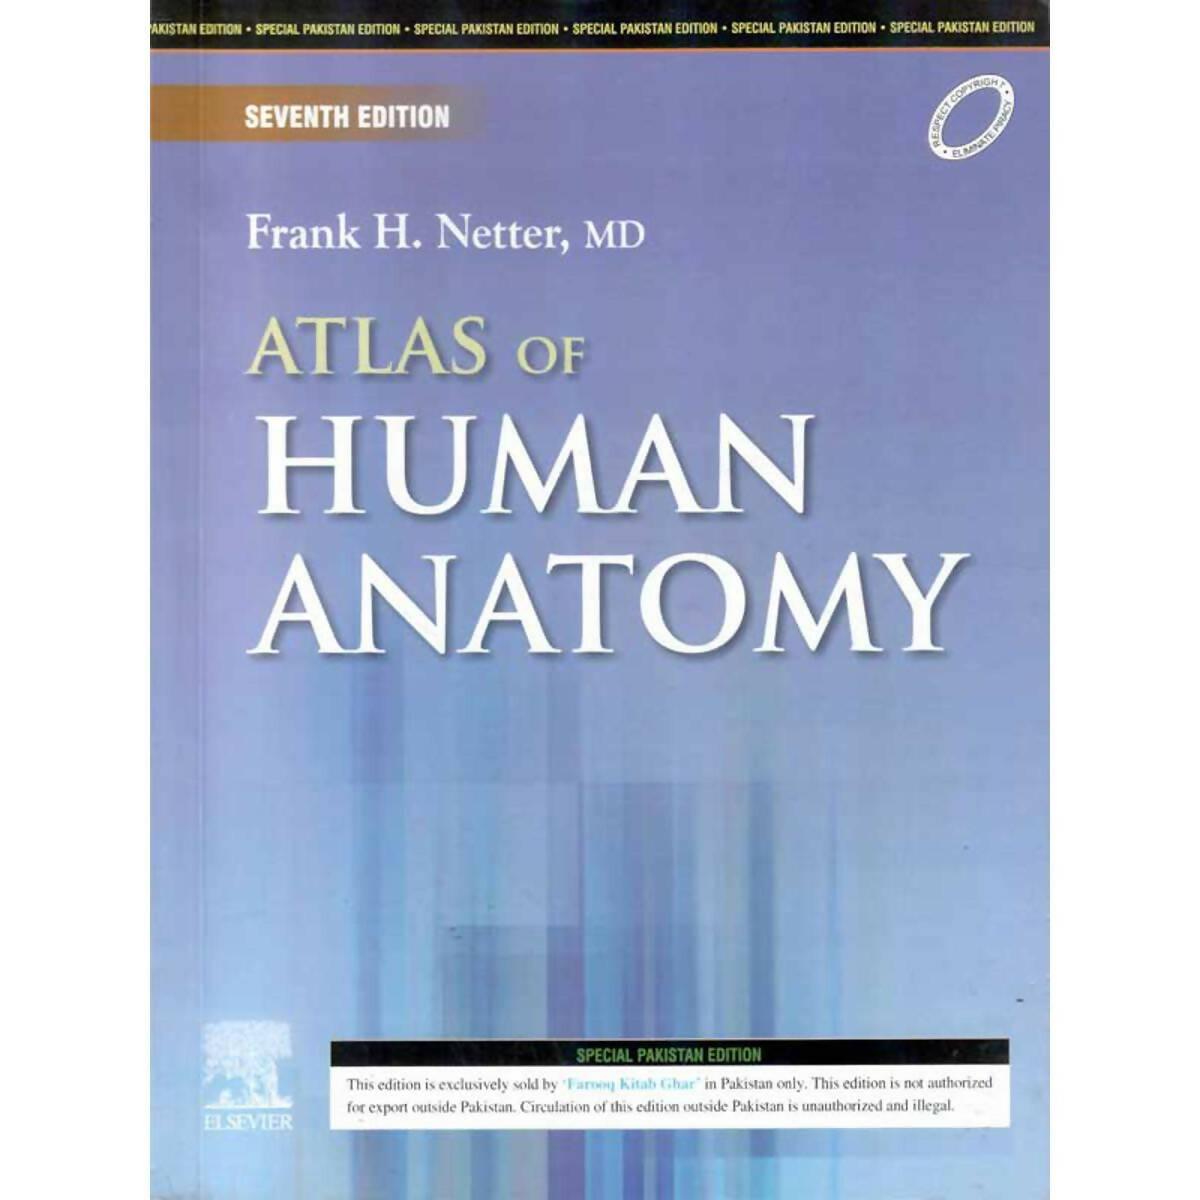 Frank H. Netter At las of Human Anatomy 7th Edition (PAKISTAN EDITION) - ValueBox